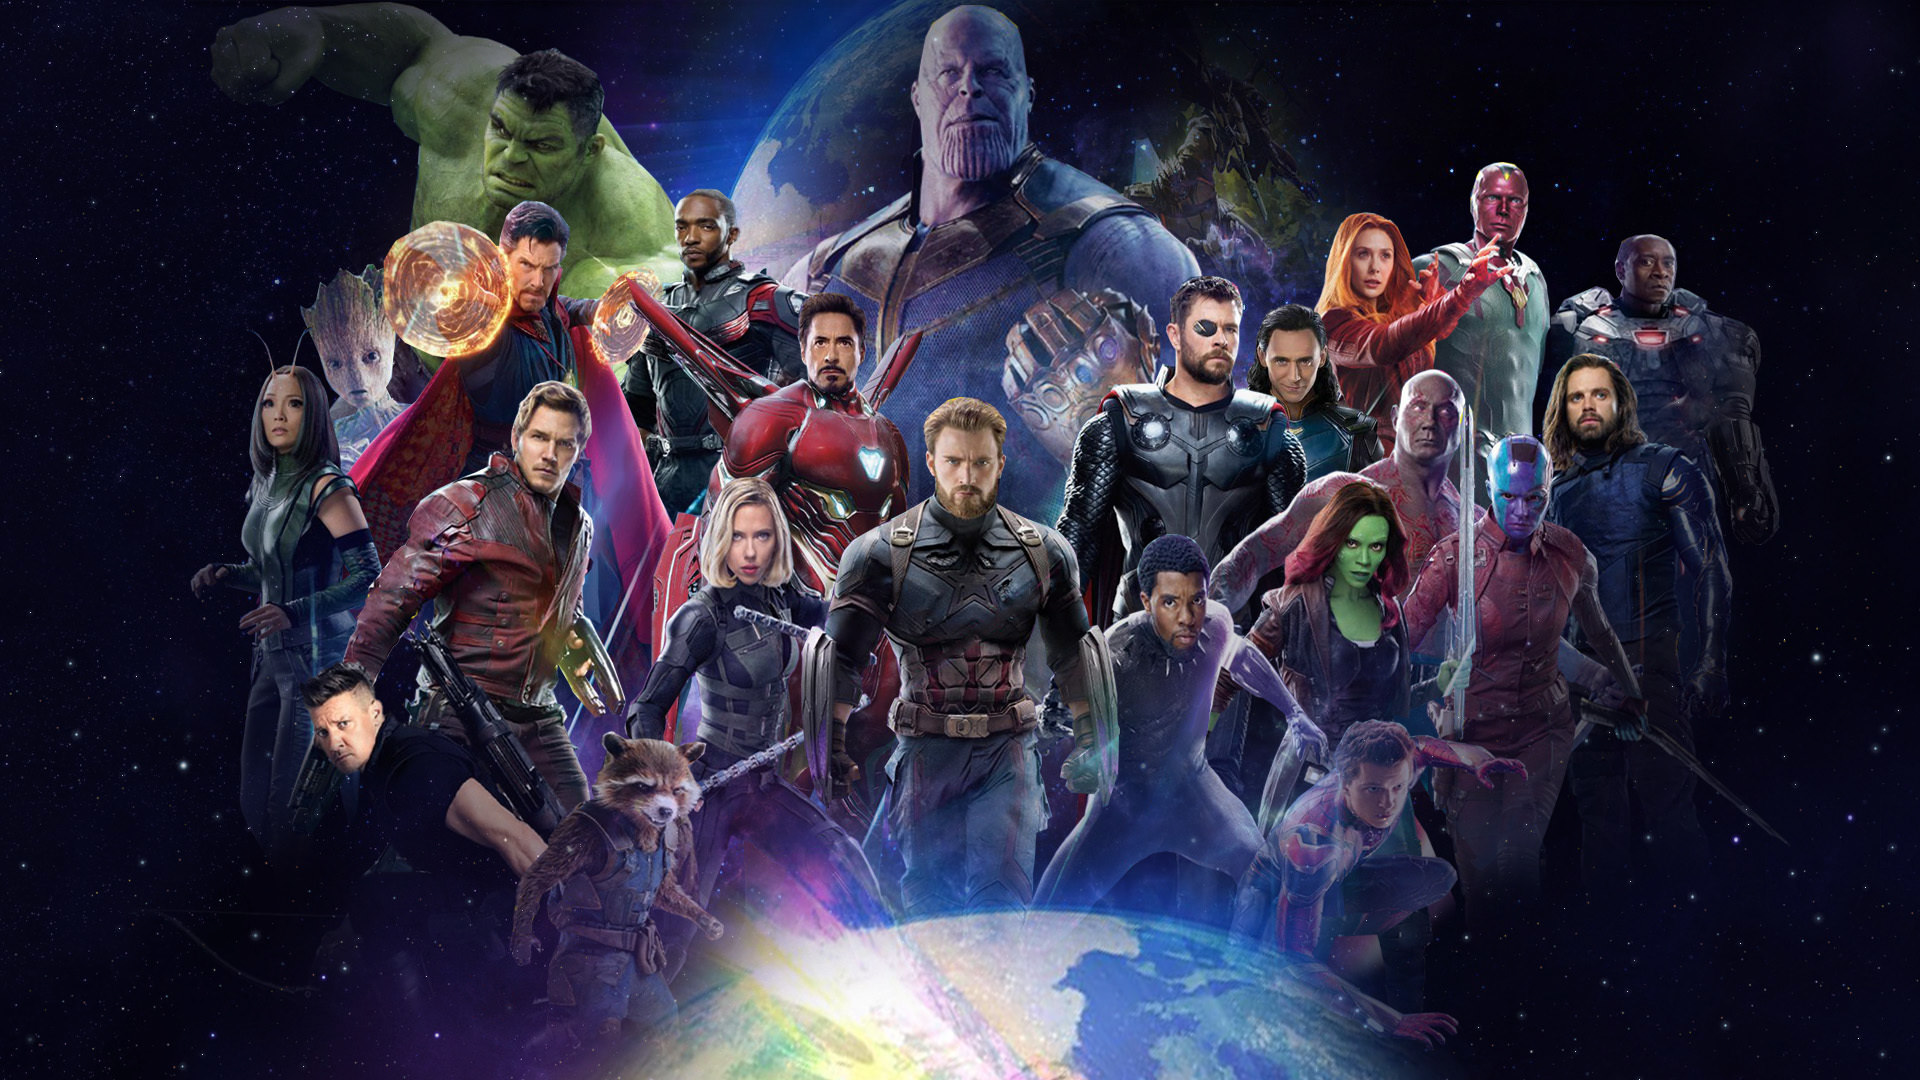 3840x2160 Avengers Infinity War 18 All Characters Fan Poster 4k Wallpaper Hd Movies 4k Wallpapers Images Photos And Background